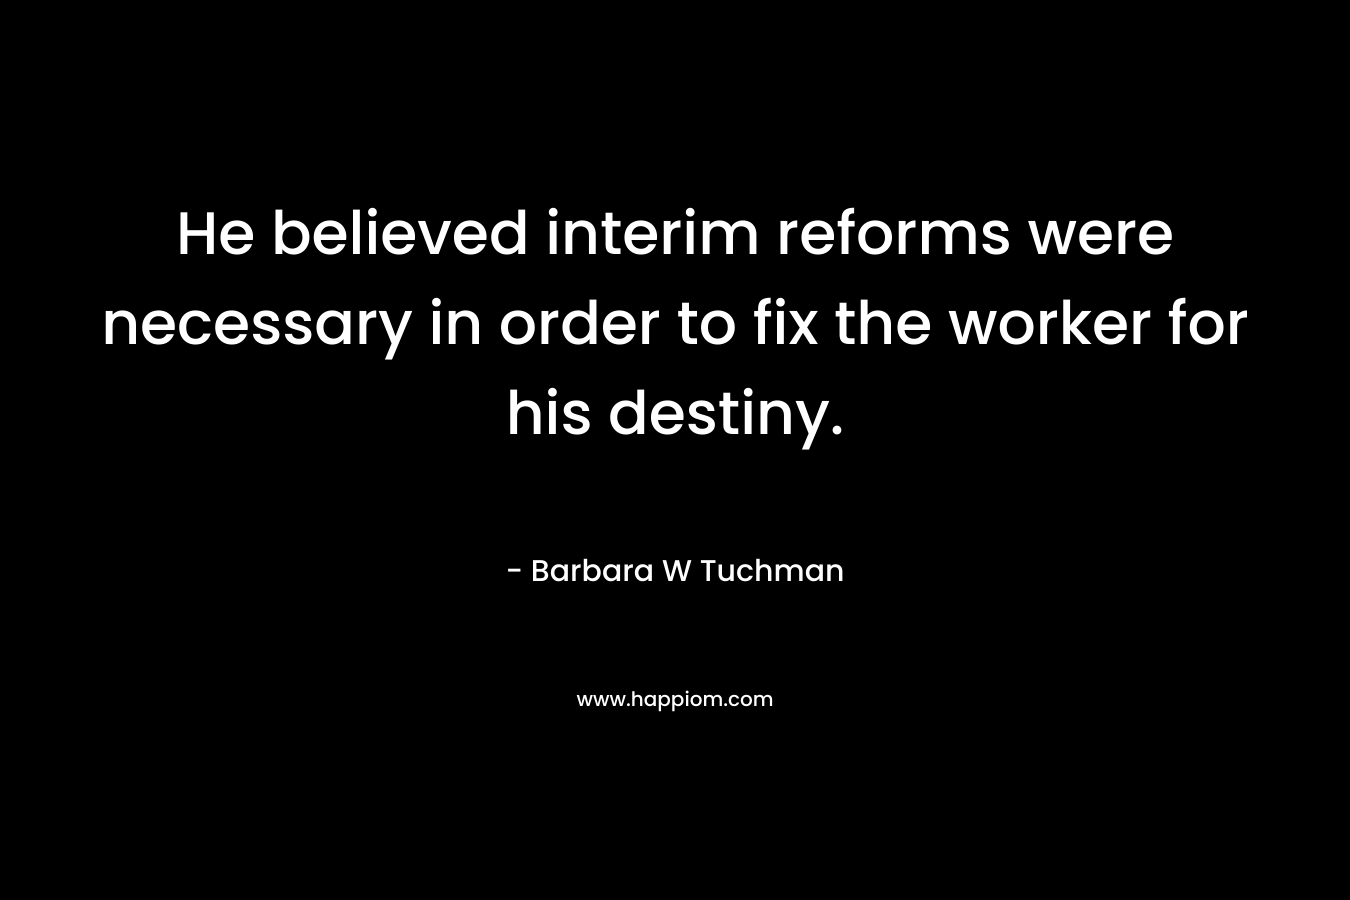 He believed interim reforms were necessary in order to fix the worker for his destiny.